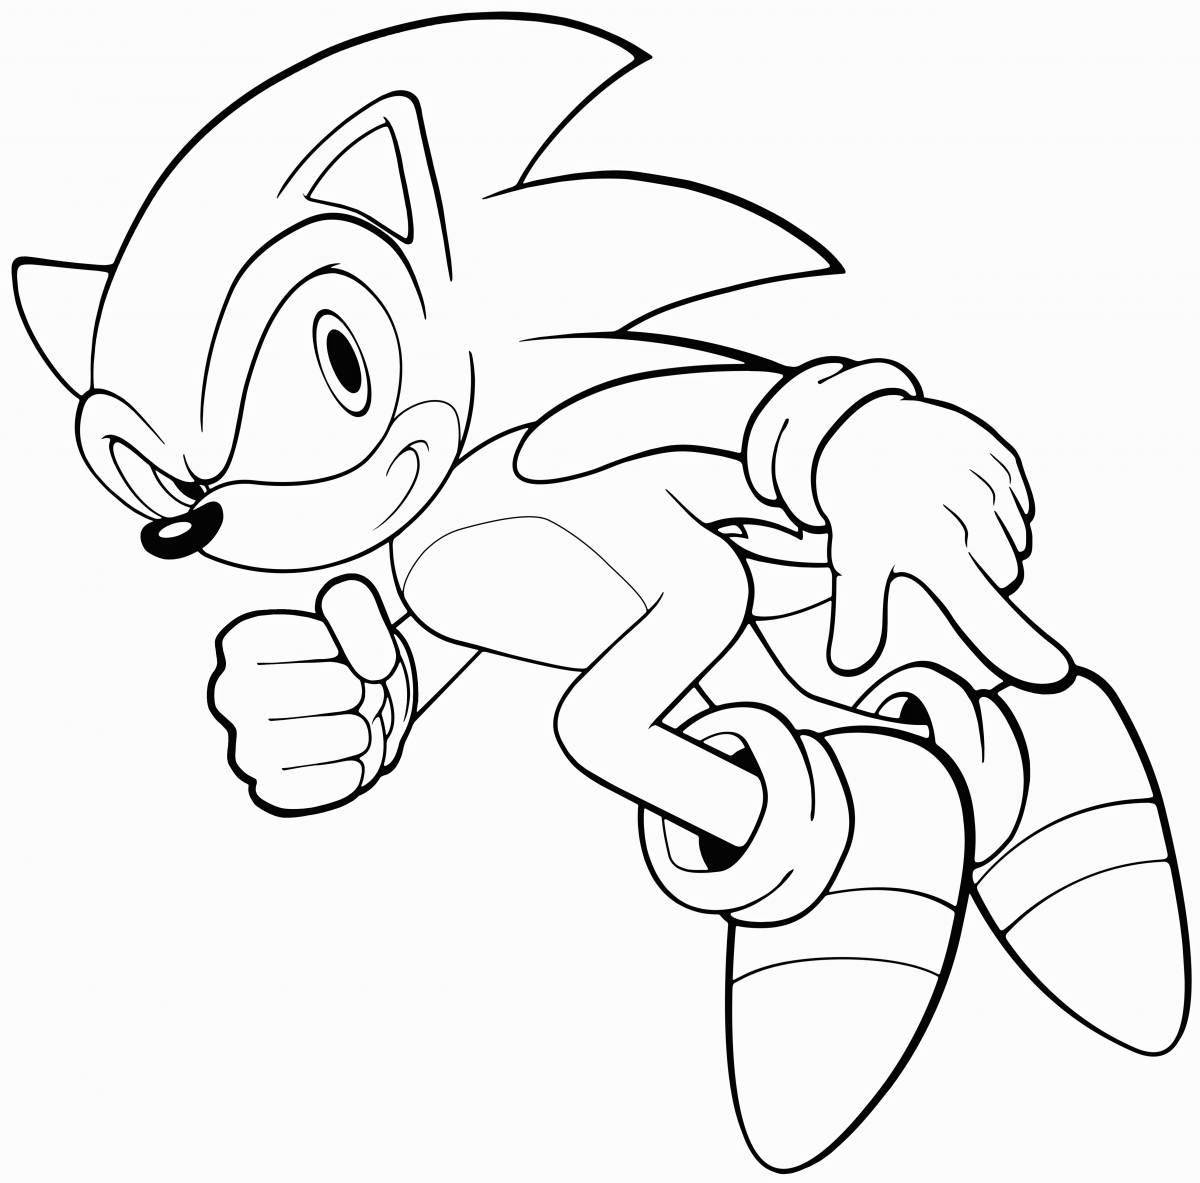 Playful sonic x coloring book